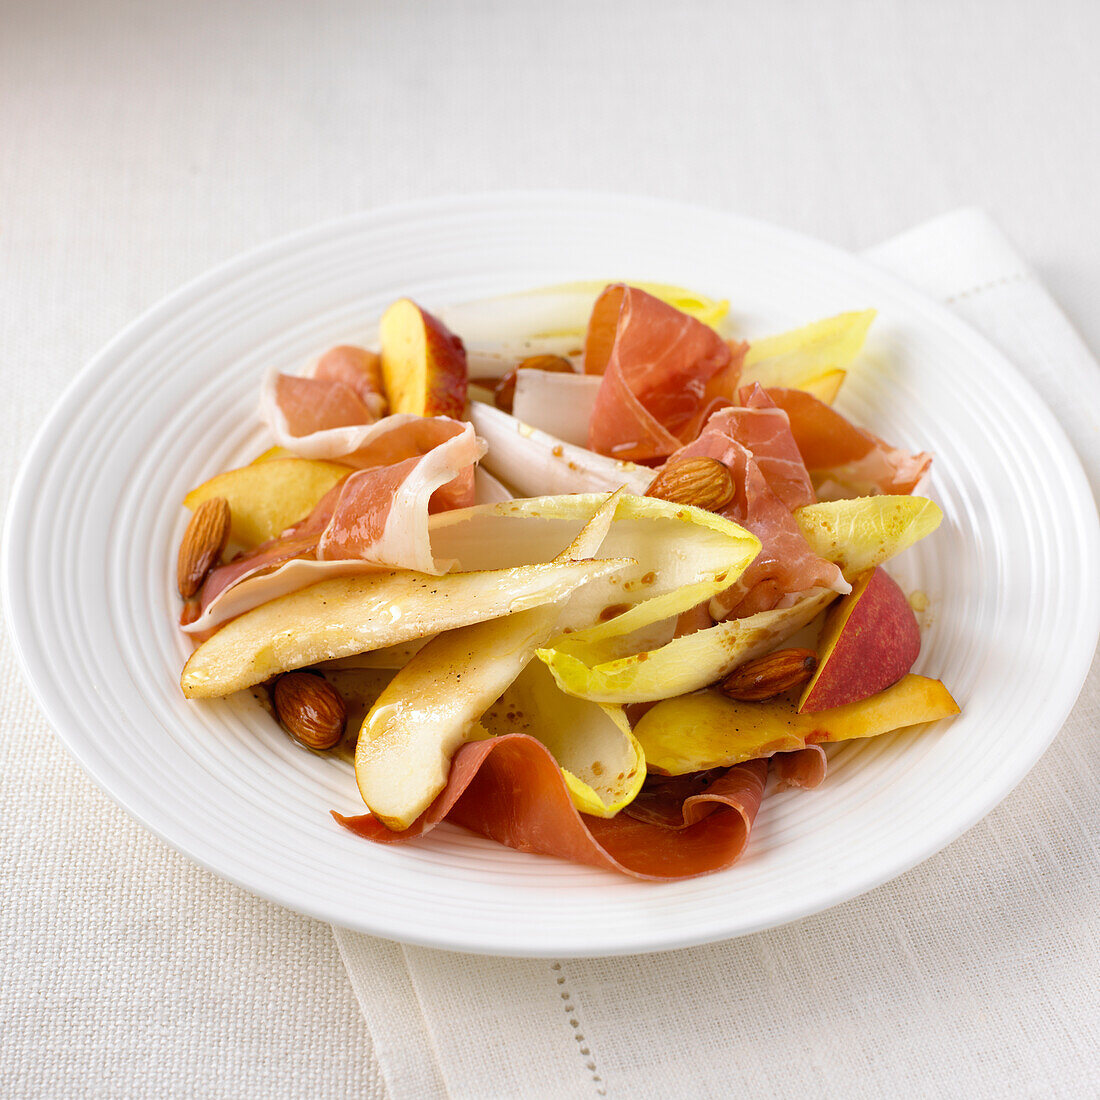 Dish of Parma ham with pear, nectarine and endive